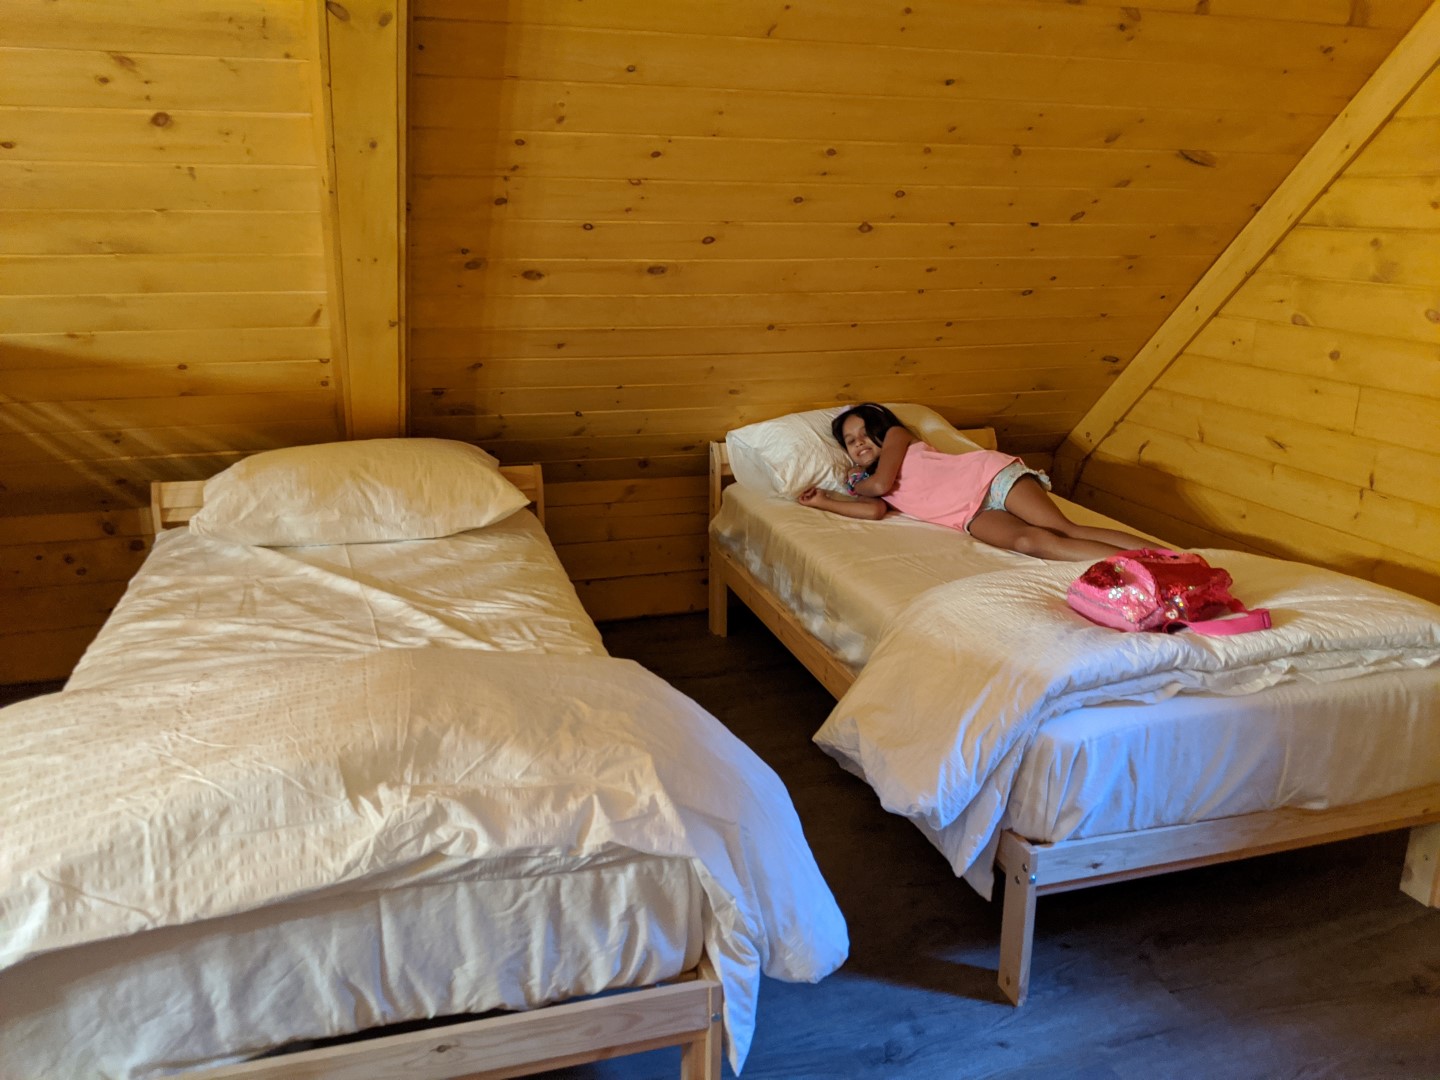 Chiefswood cabins review with kids